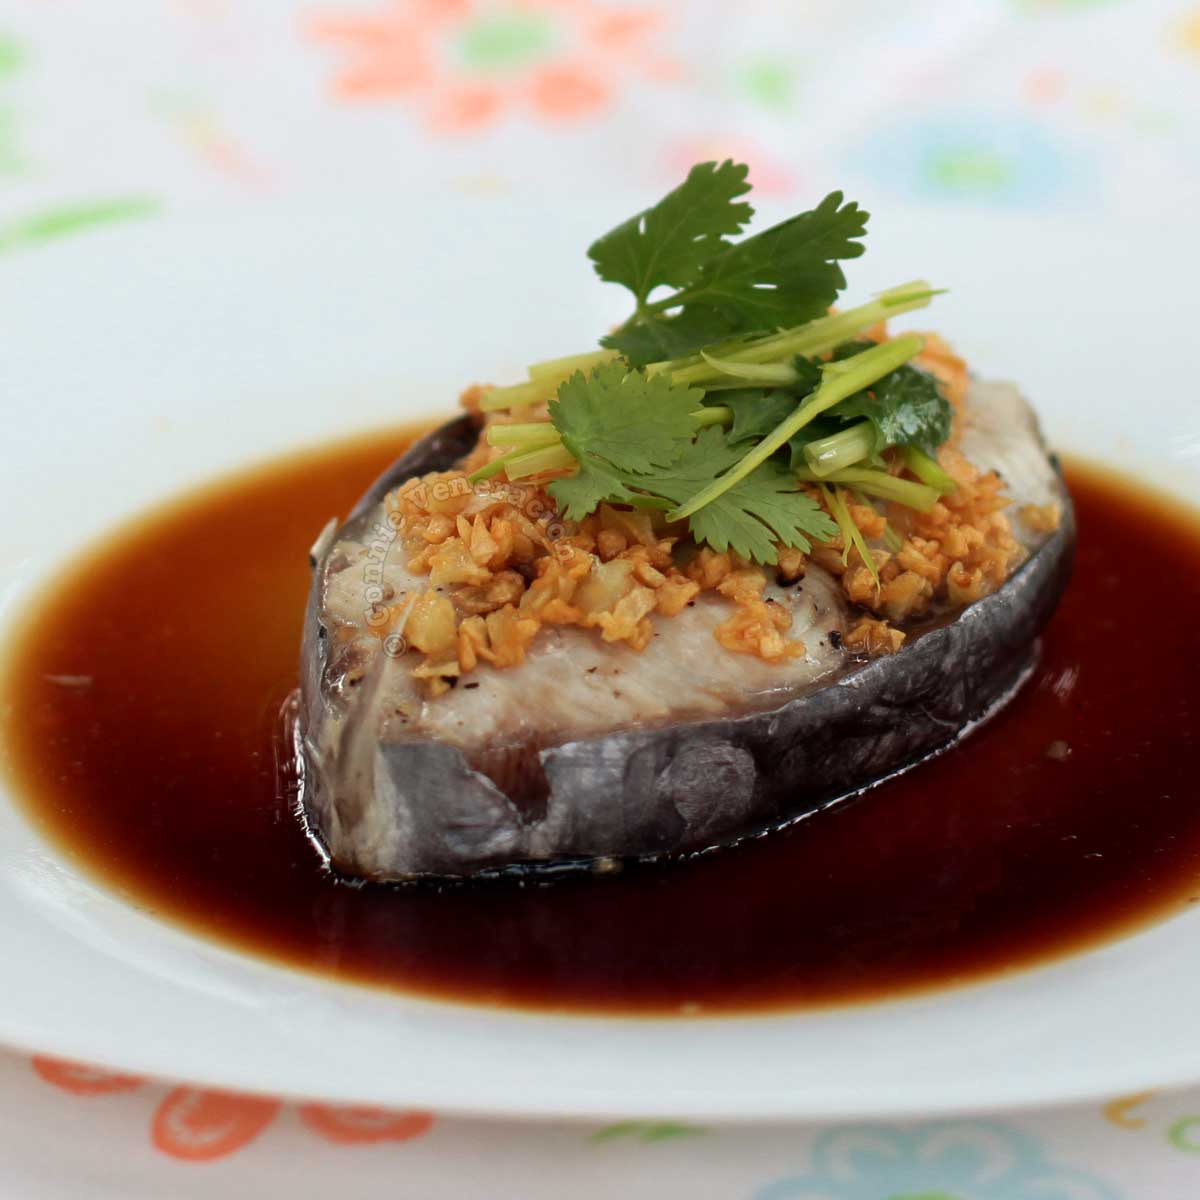 Steamed fish steak with sweet soy sauce topped with cilantro and scallions